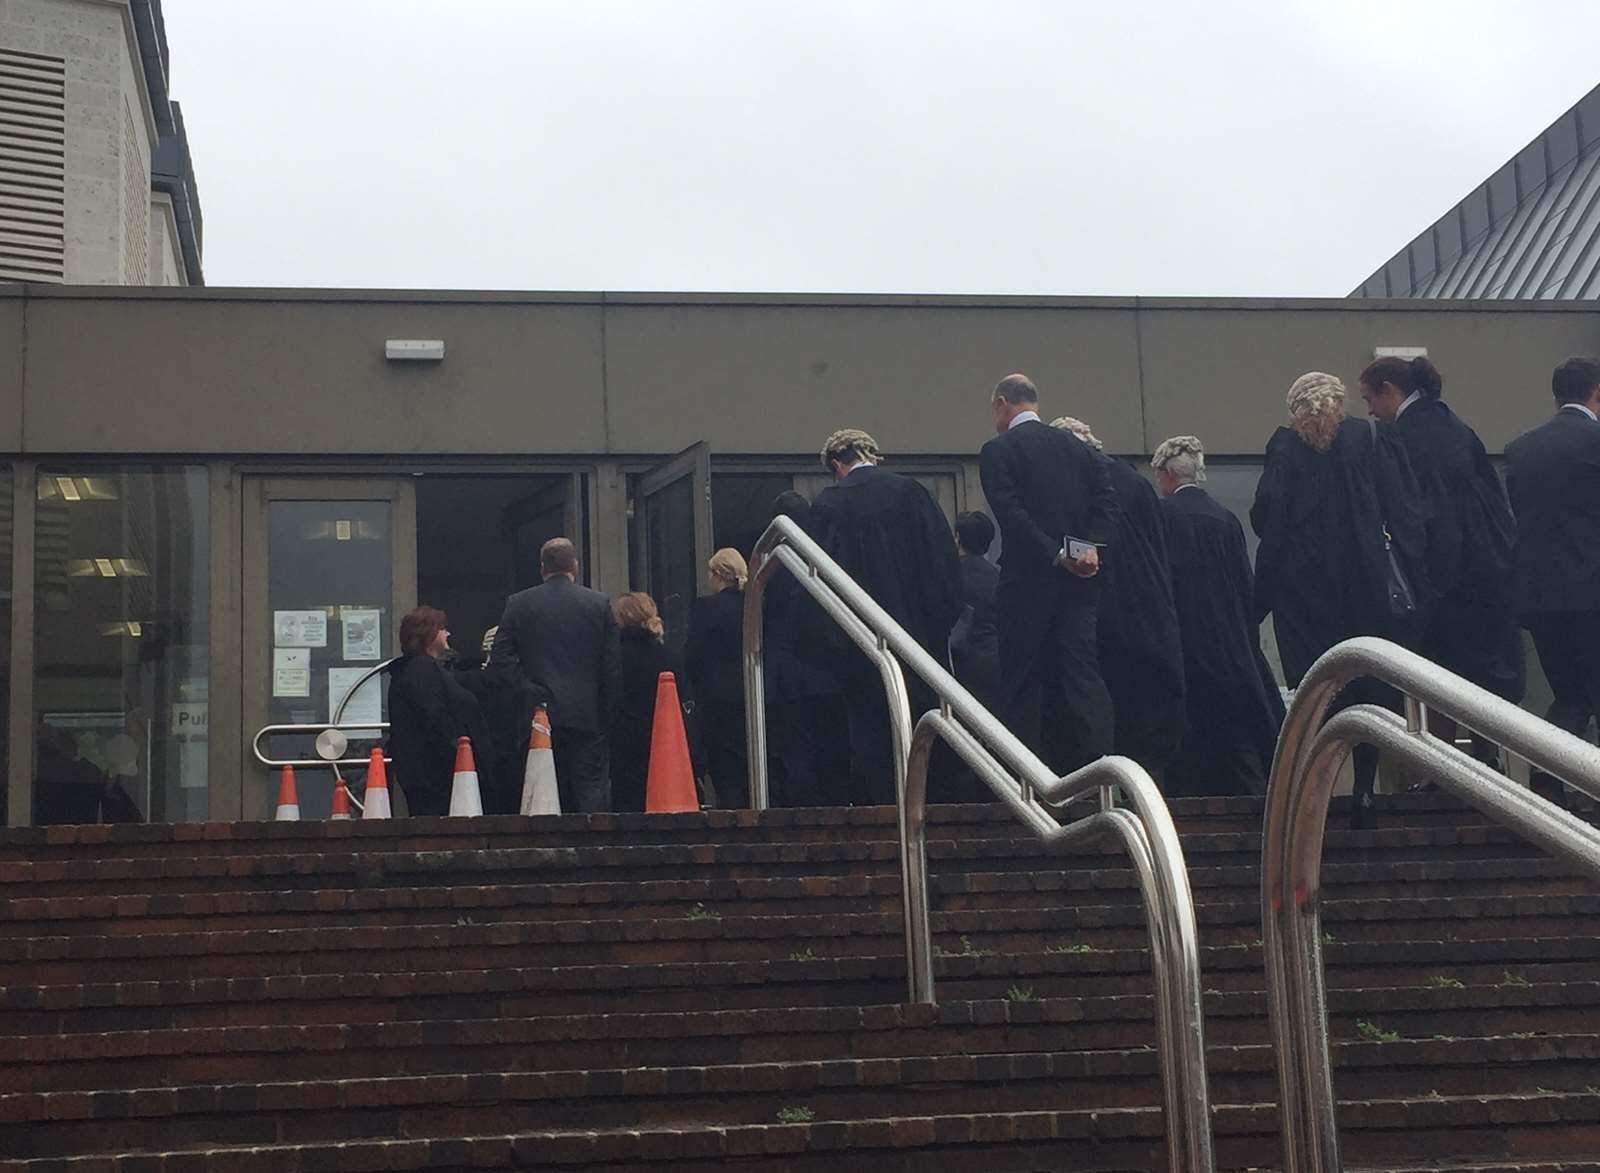 People return to Maidstone Crown Court after the evacuation